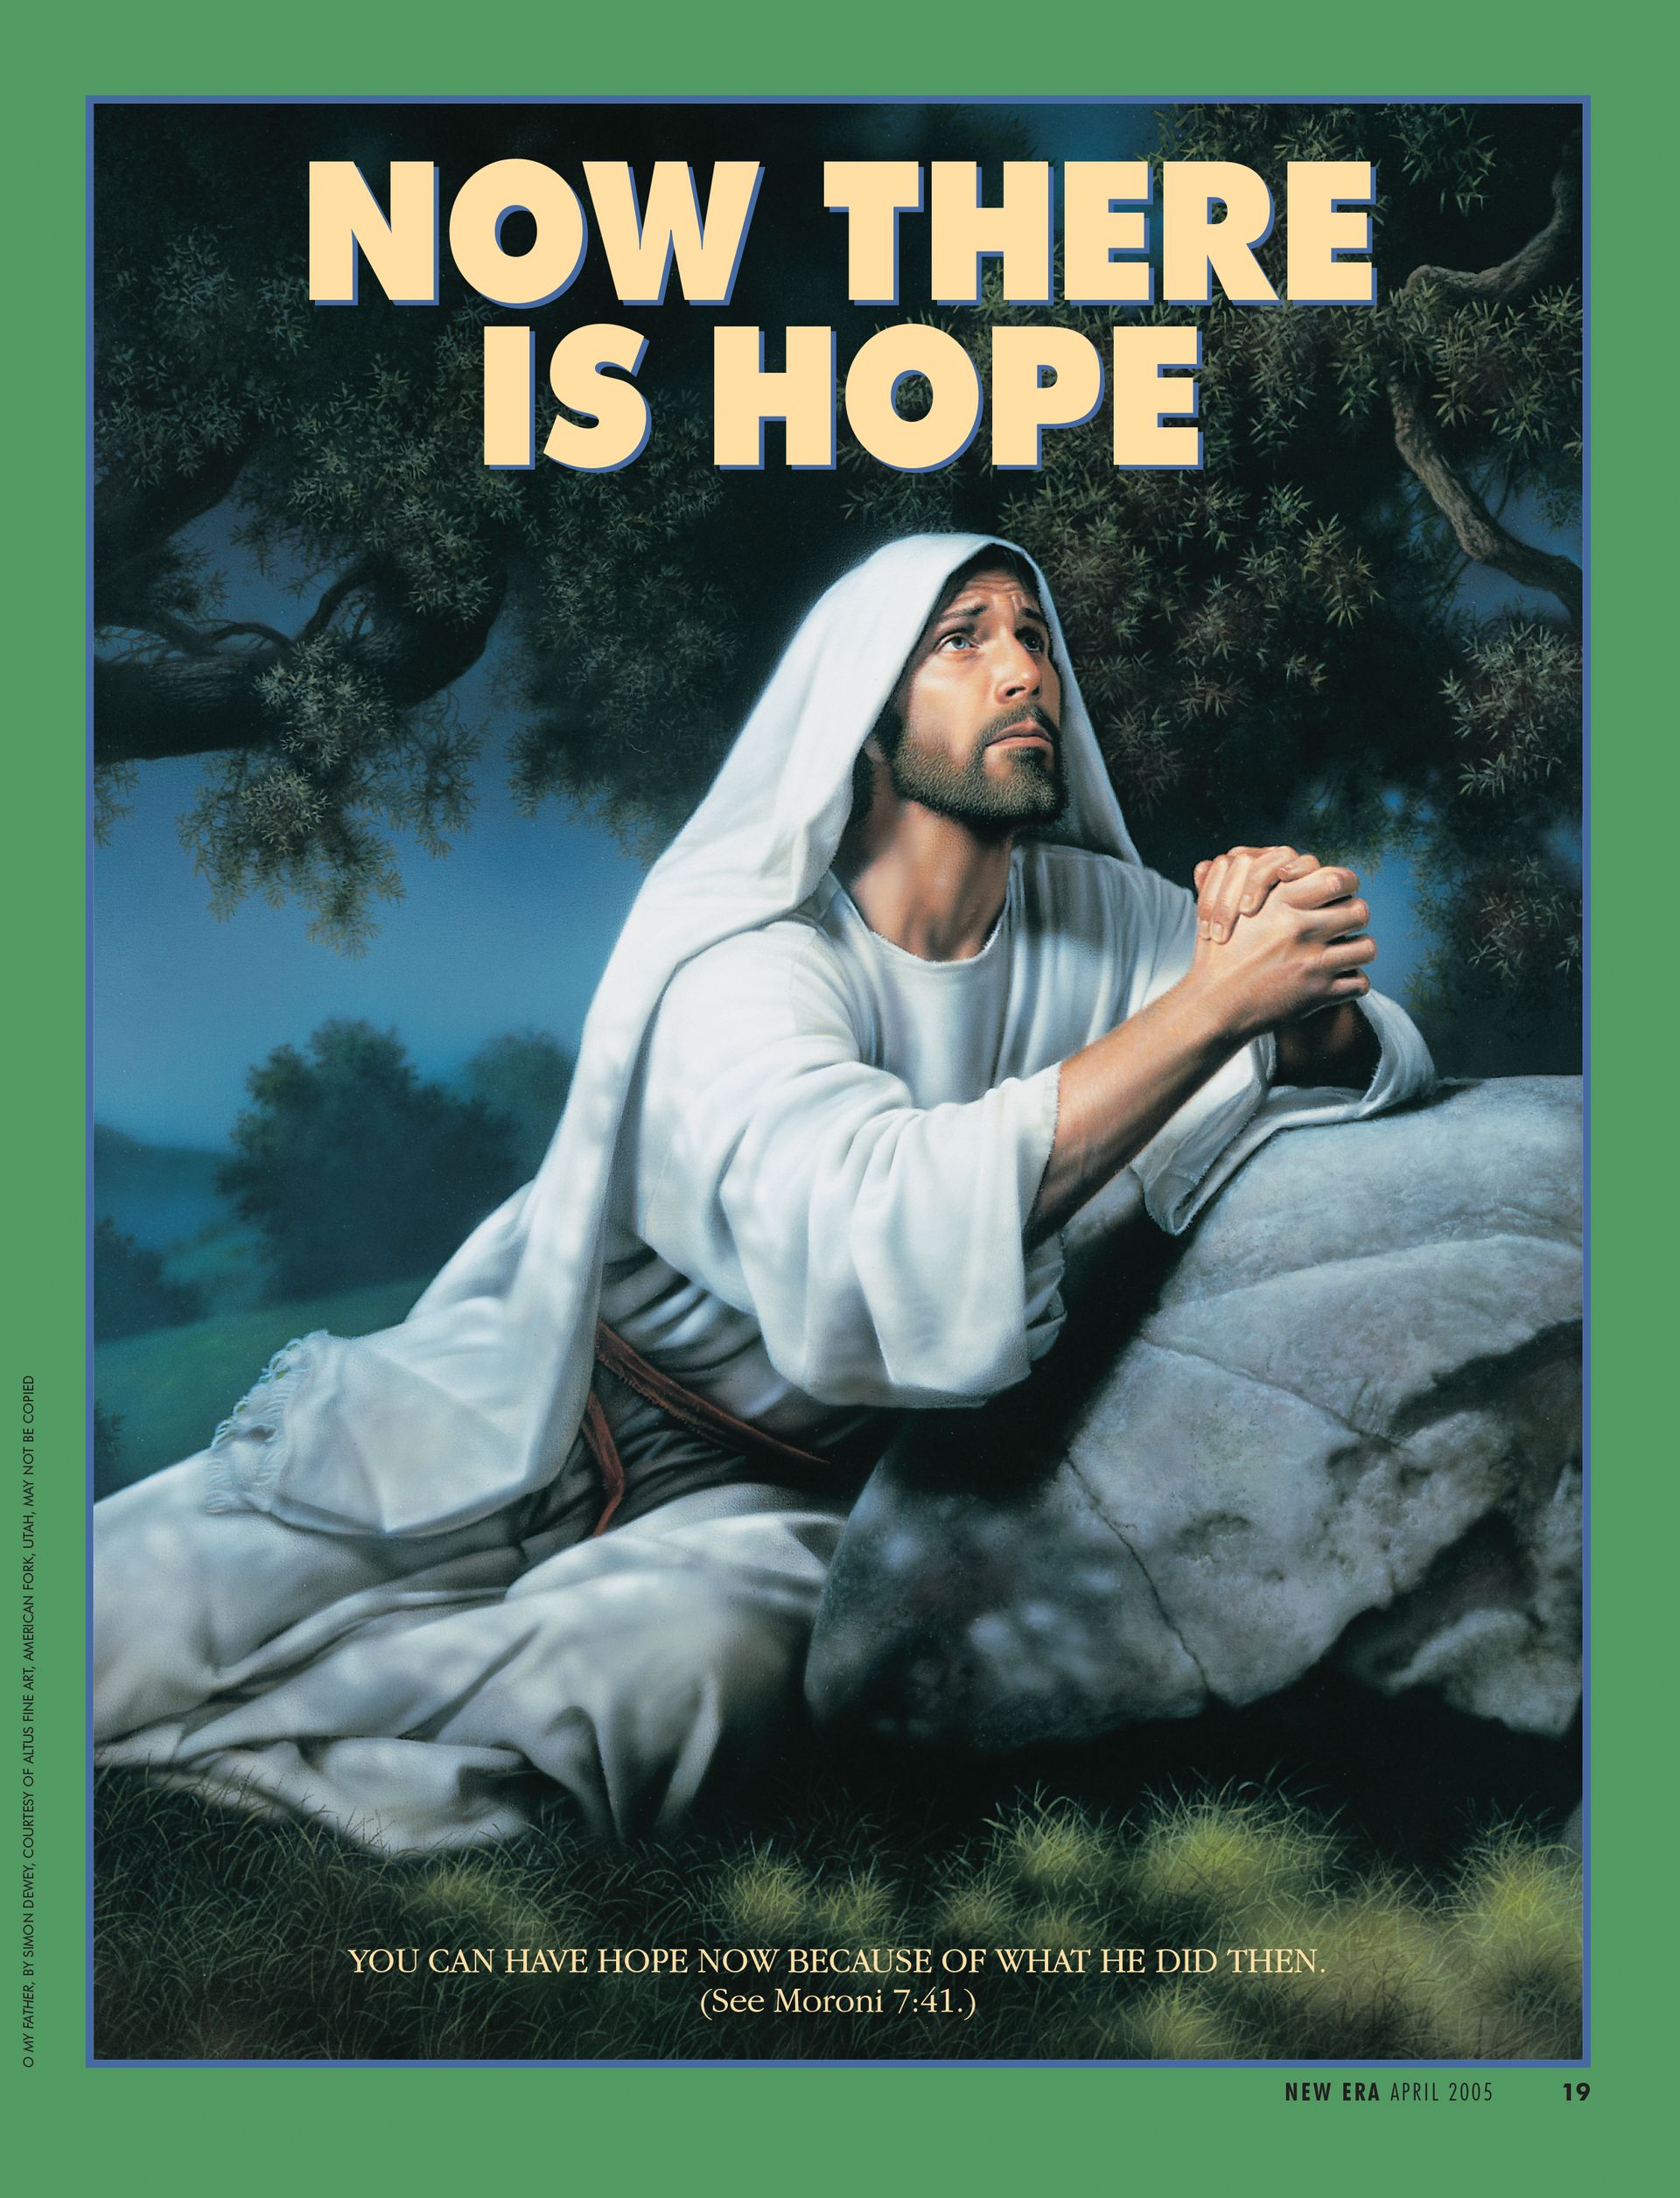 Now There Is Hope. You can have hope now because of what He did then. (See Moroni 7:41.) Apr. 2005 © undefined ipCode 1.